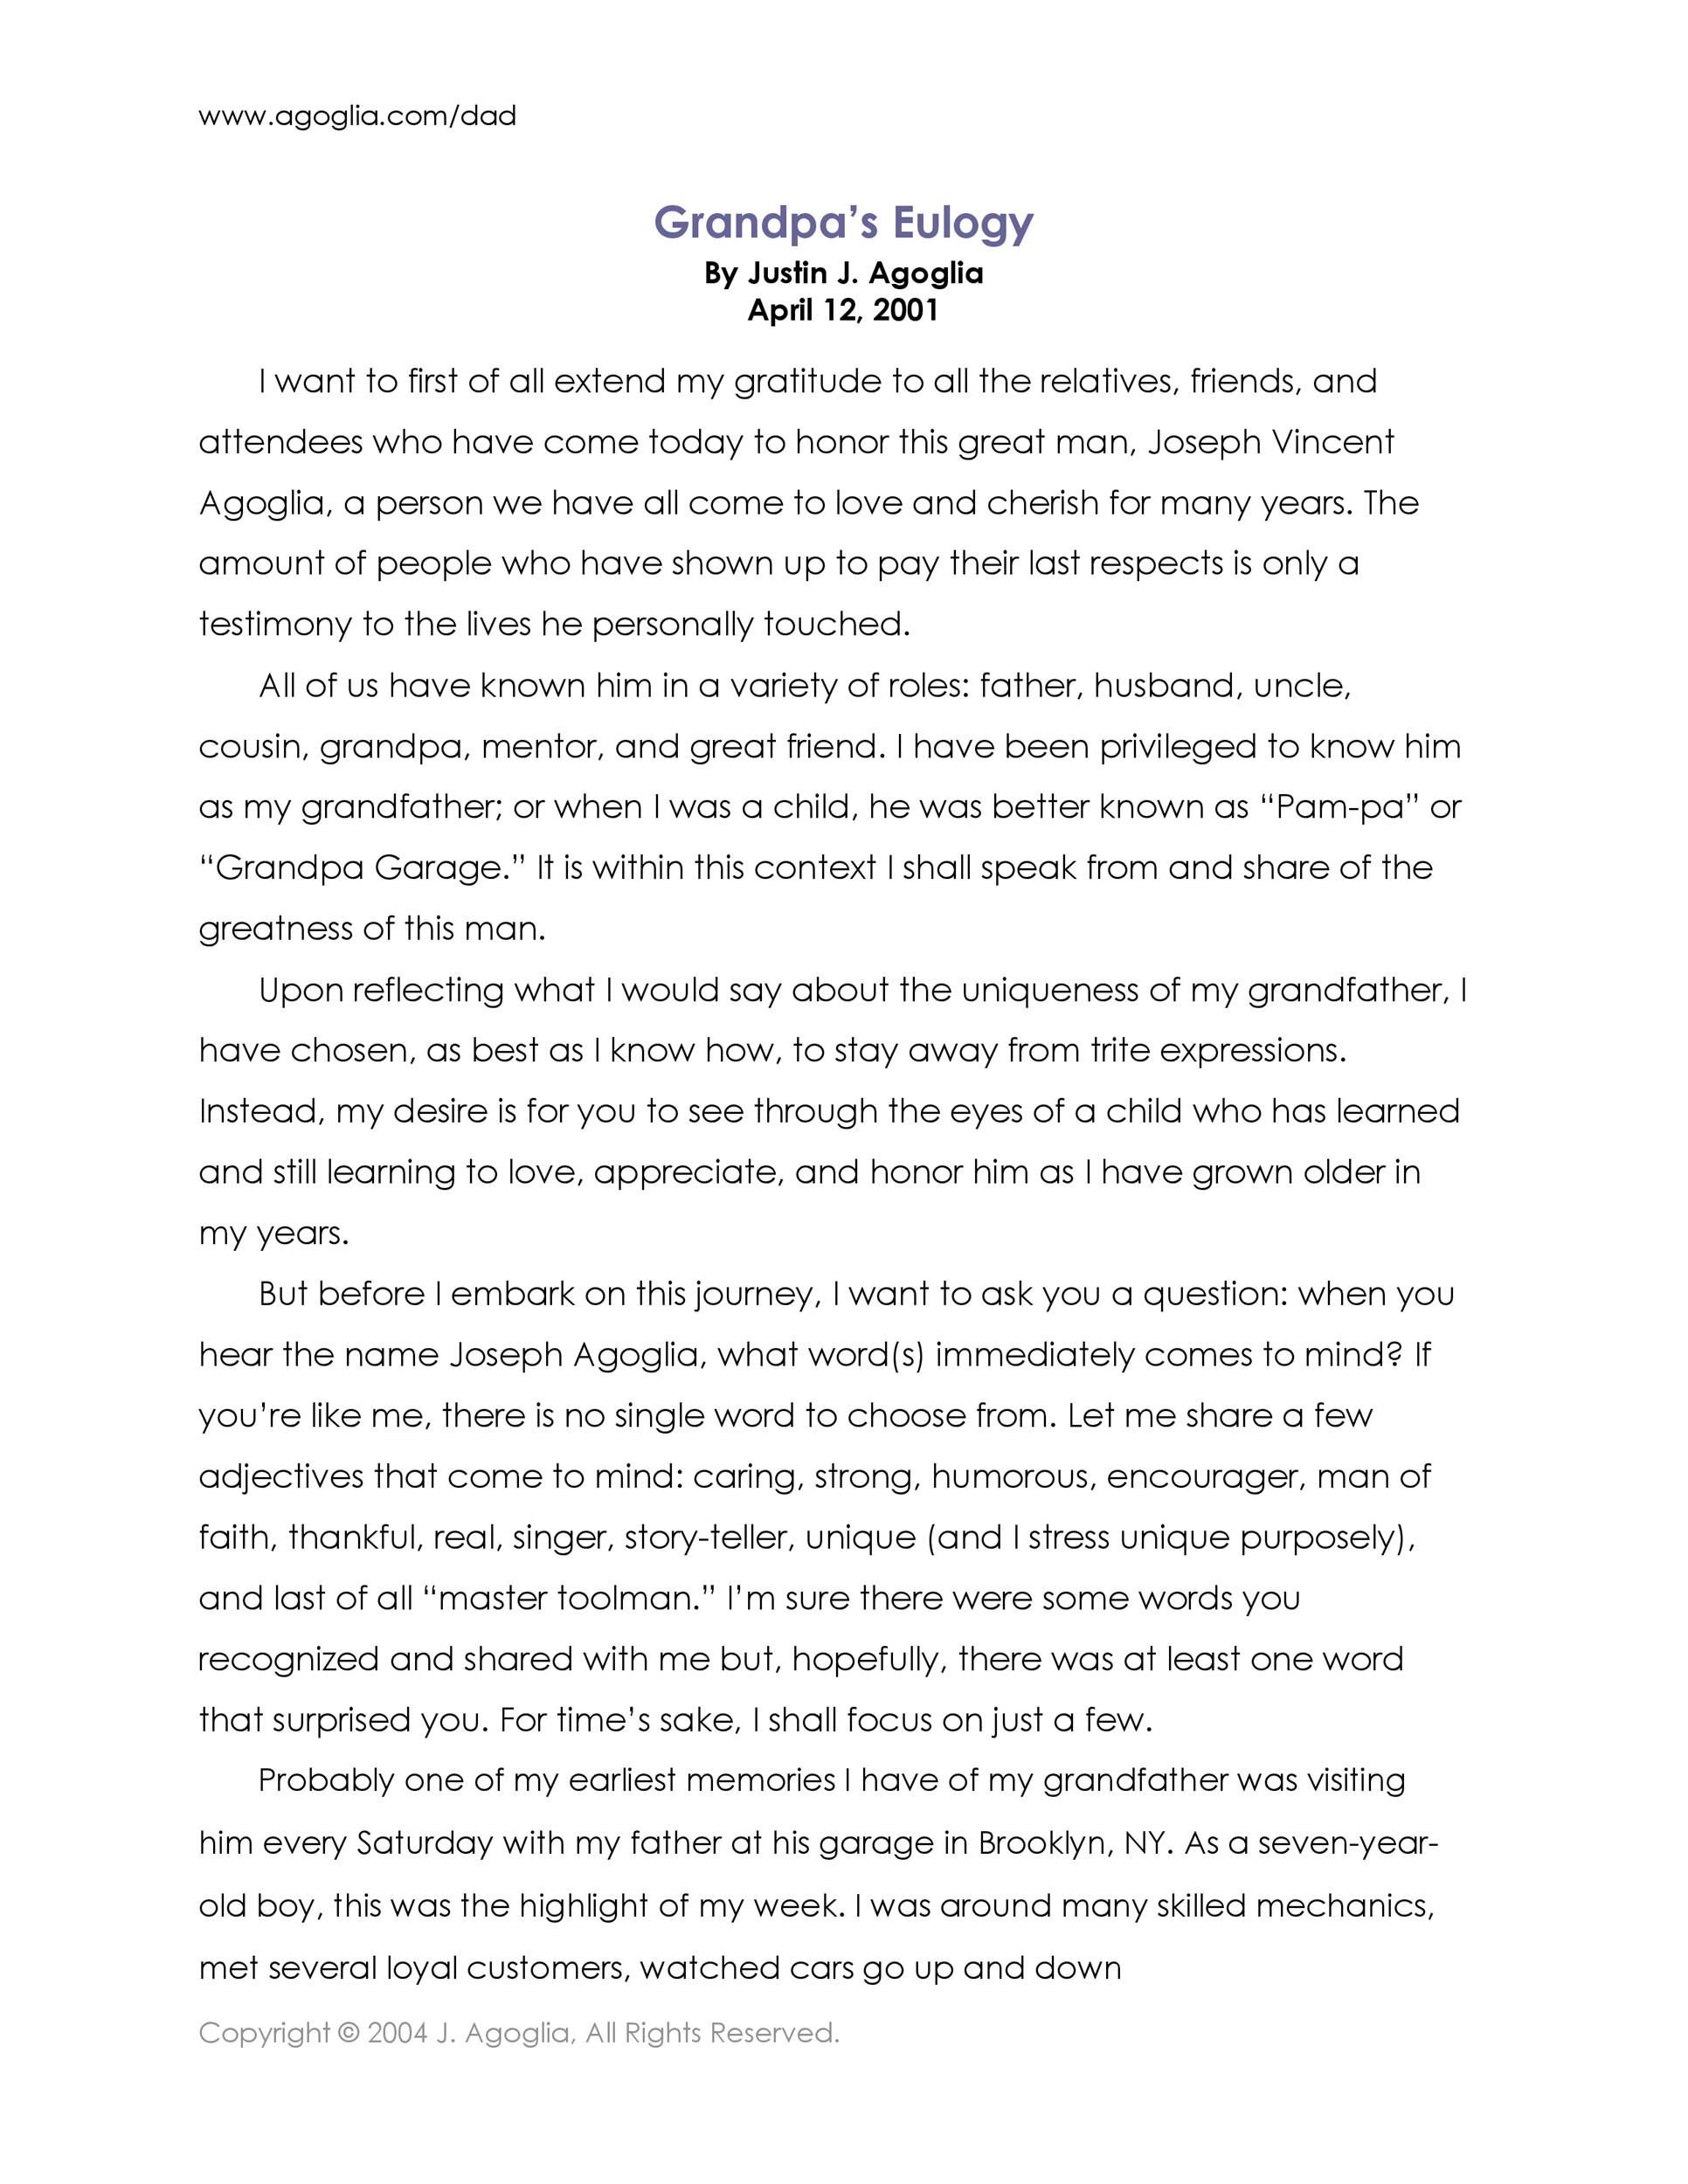 50 Best Eulogy Templates (For Relatives or Friends) ᐅ TemplateLab